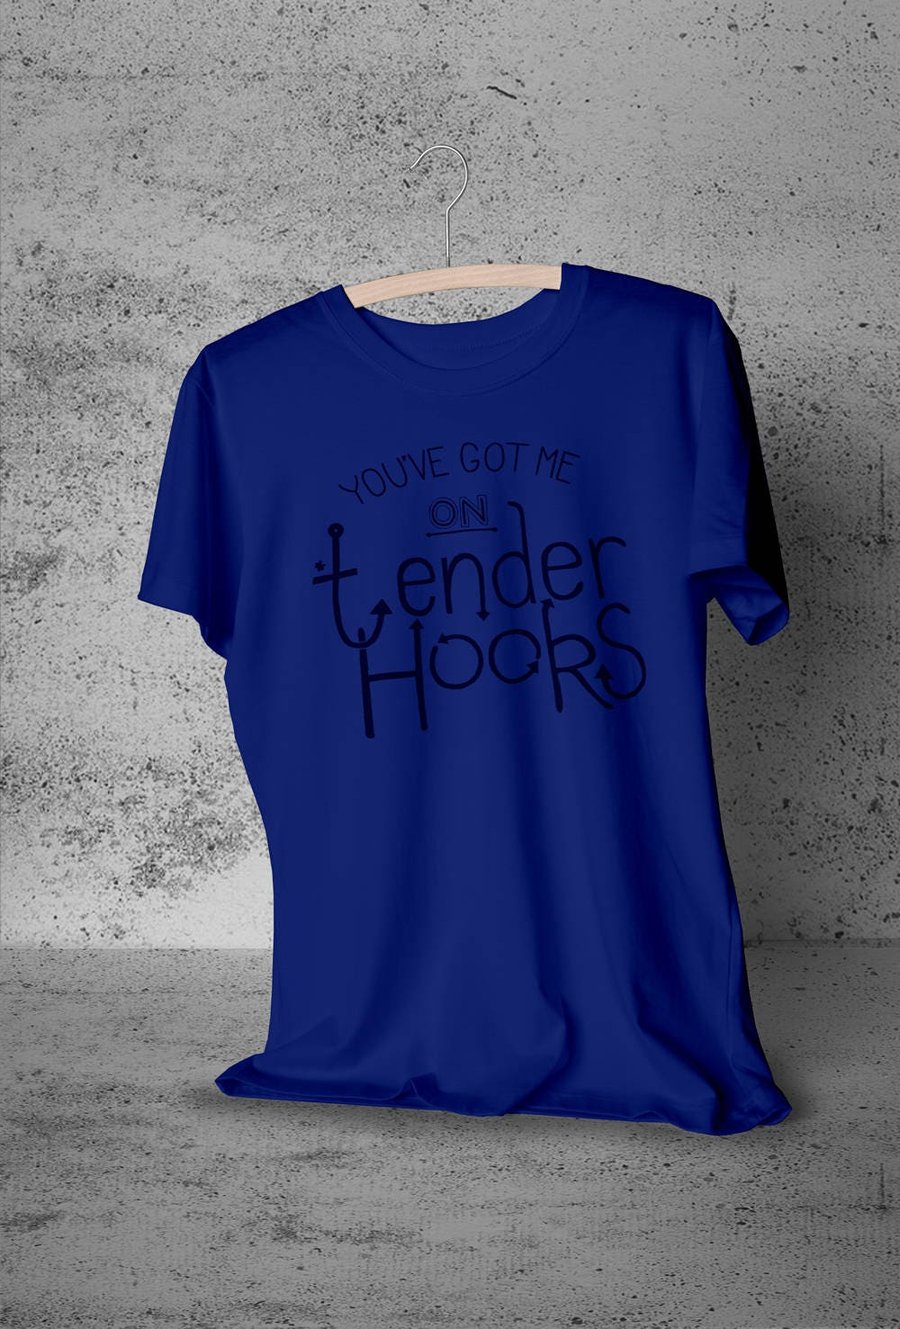 Mens Type T-Shirt 'Misquoted Phrases Series'- TenderTenter Hooks. Male graphic 